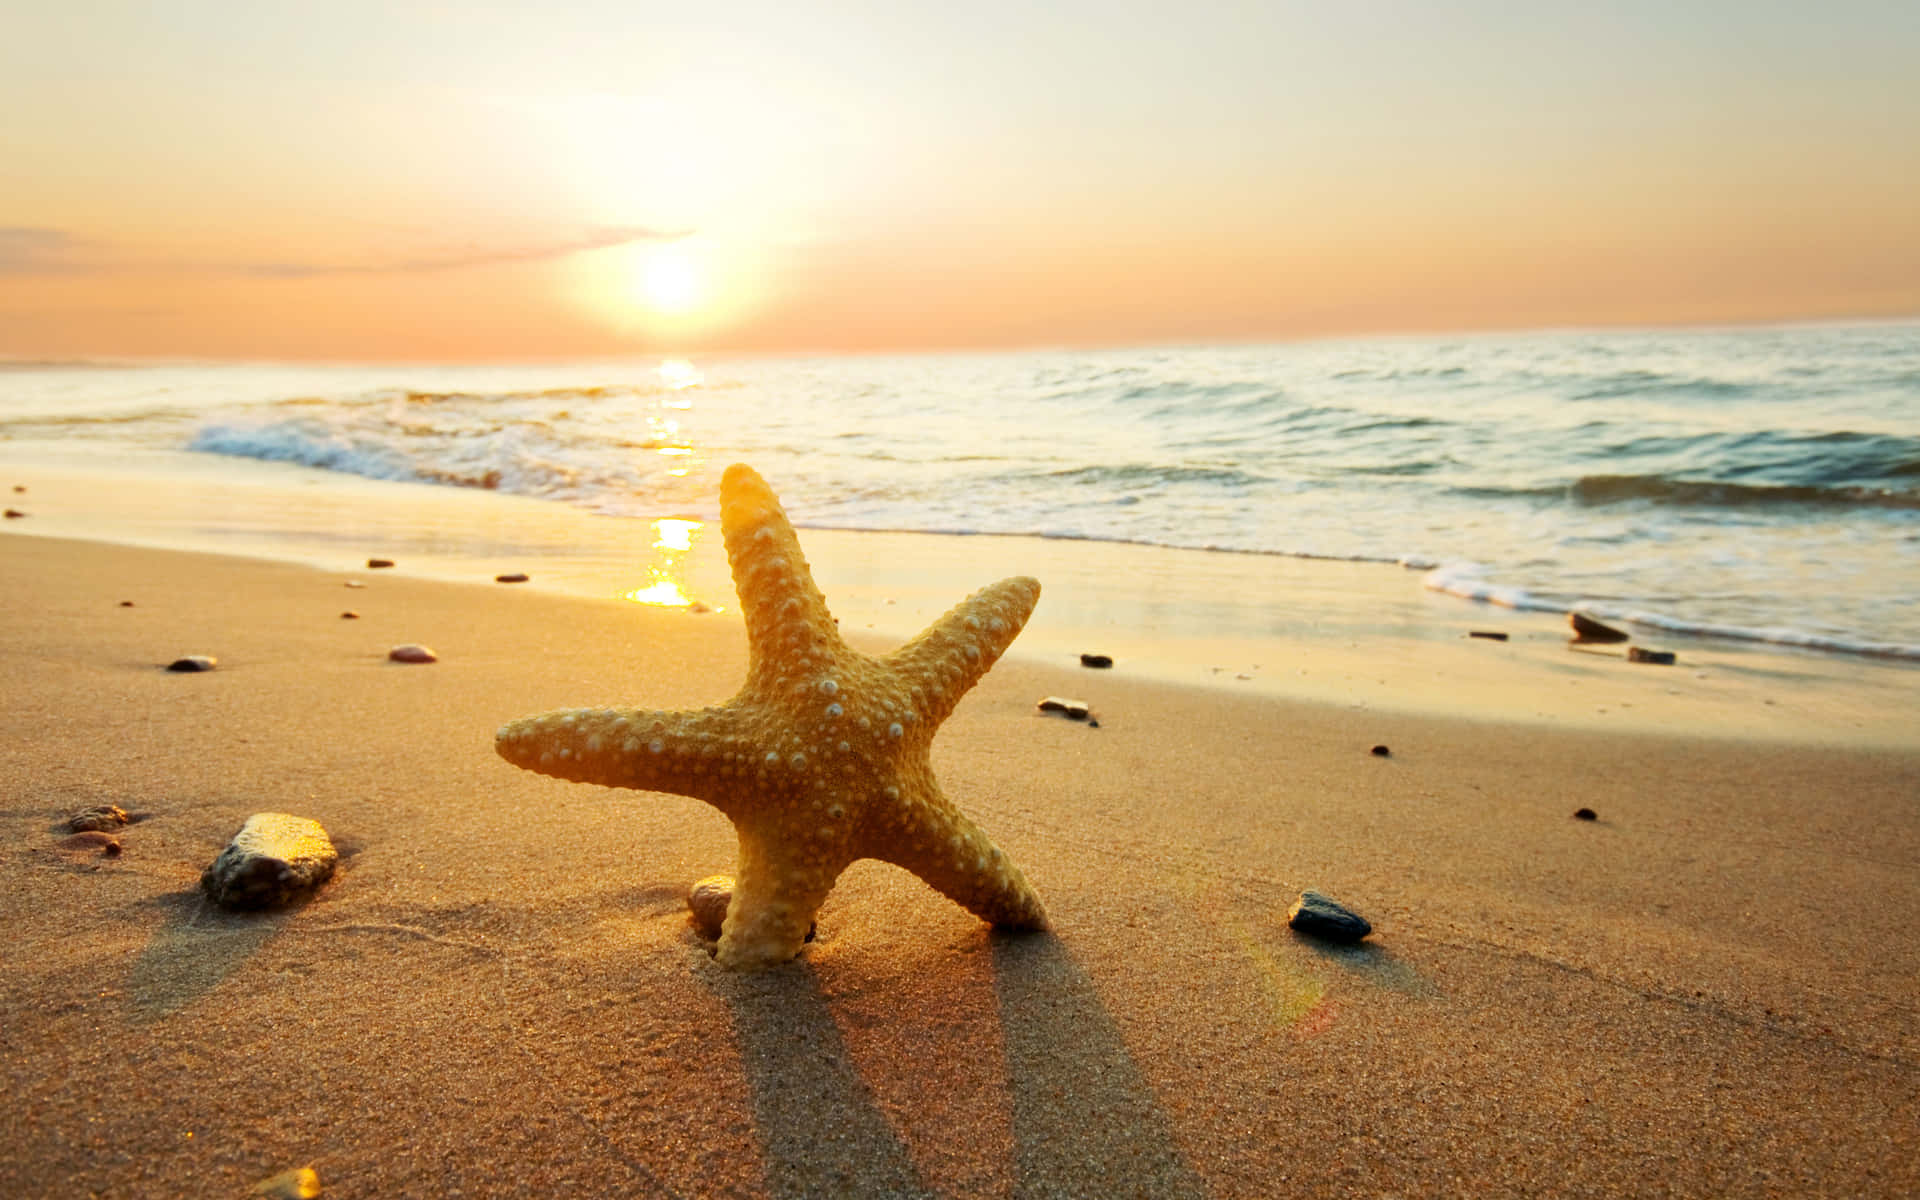 A Starfish Resting on a Rocky Beach Shore